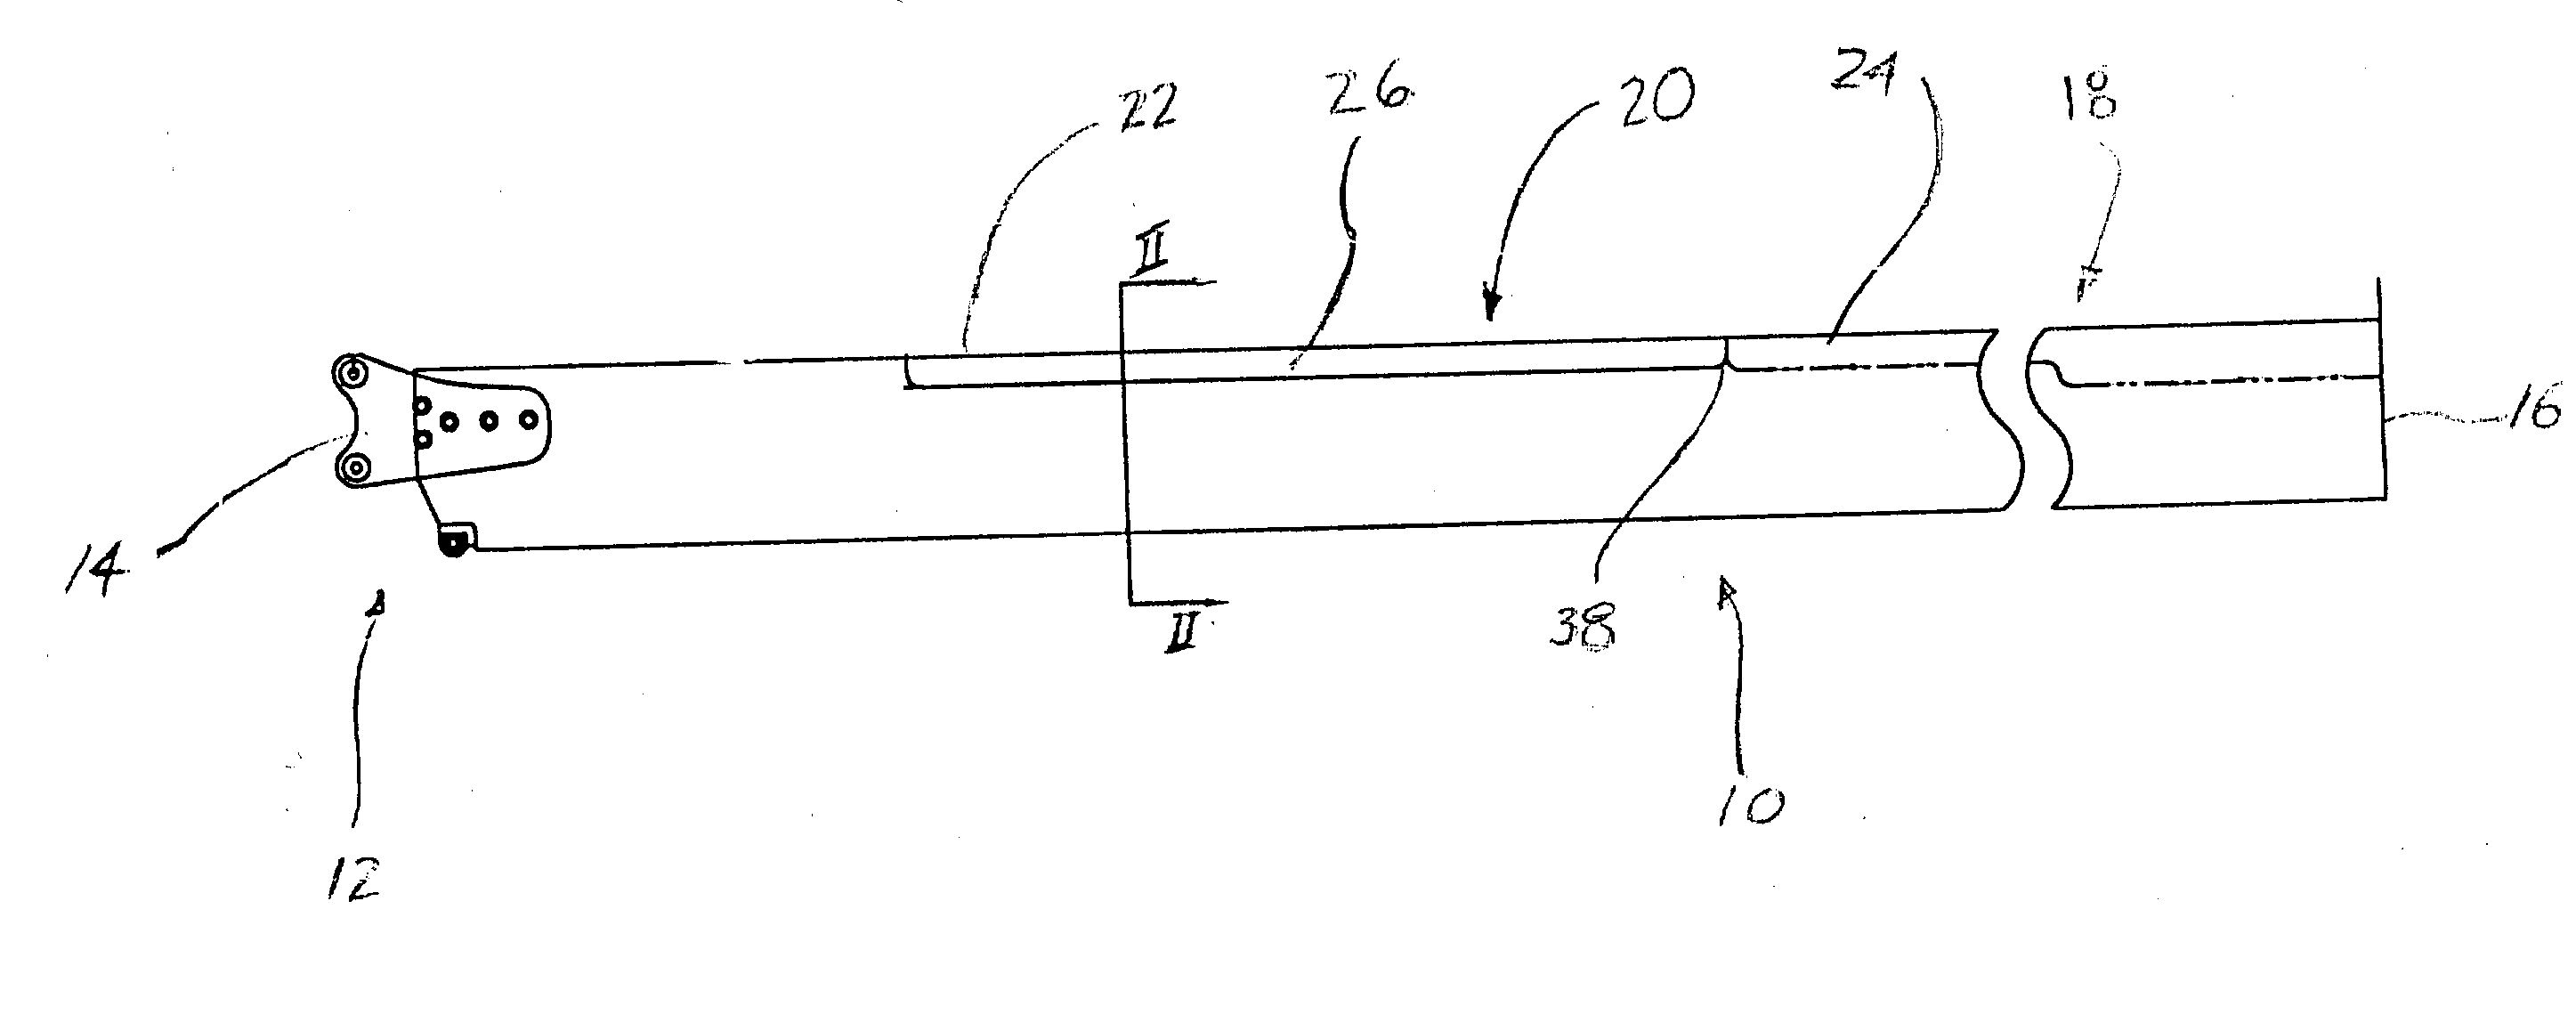 Helicopter rotor and method of repairing same